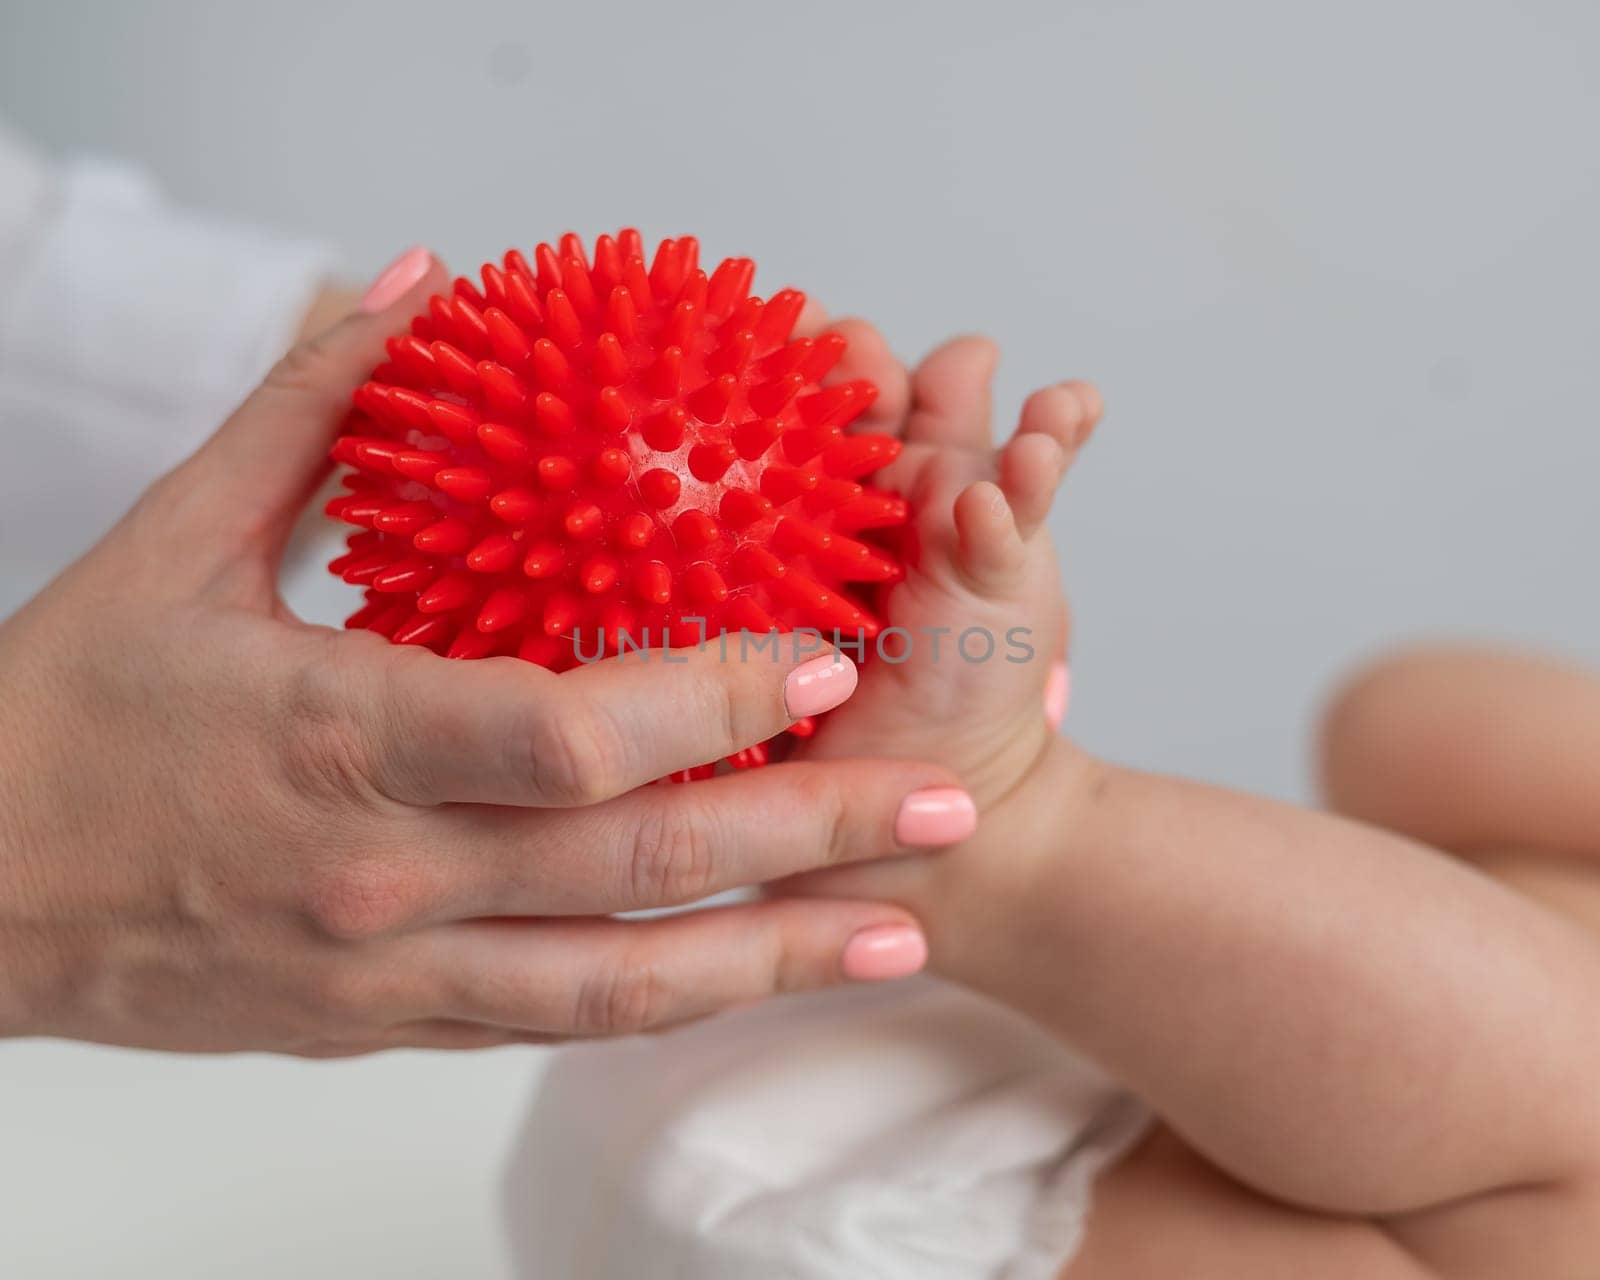 A doctor massages a baby's foot using a spiked ball. by mrwed54